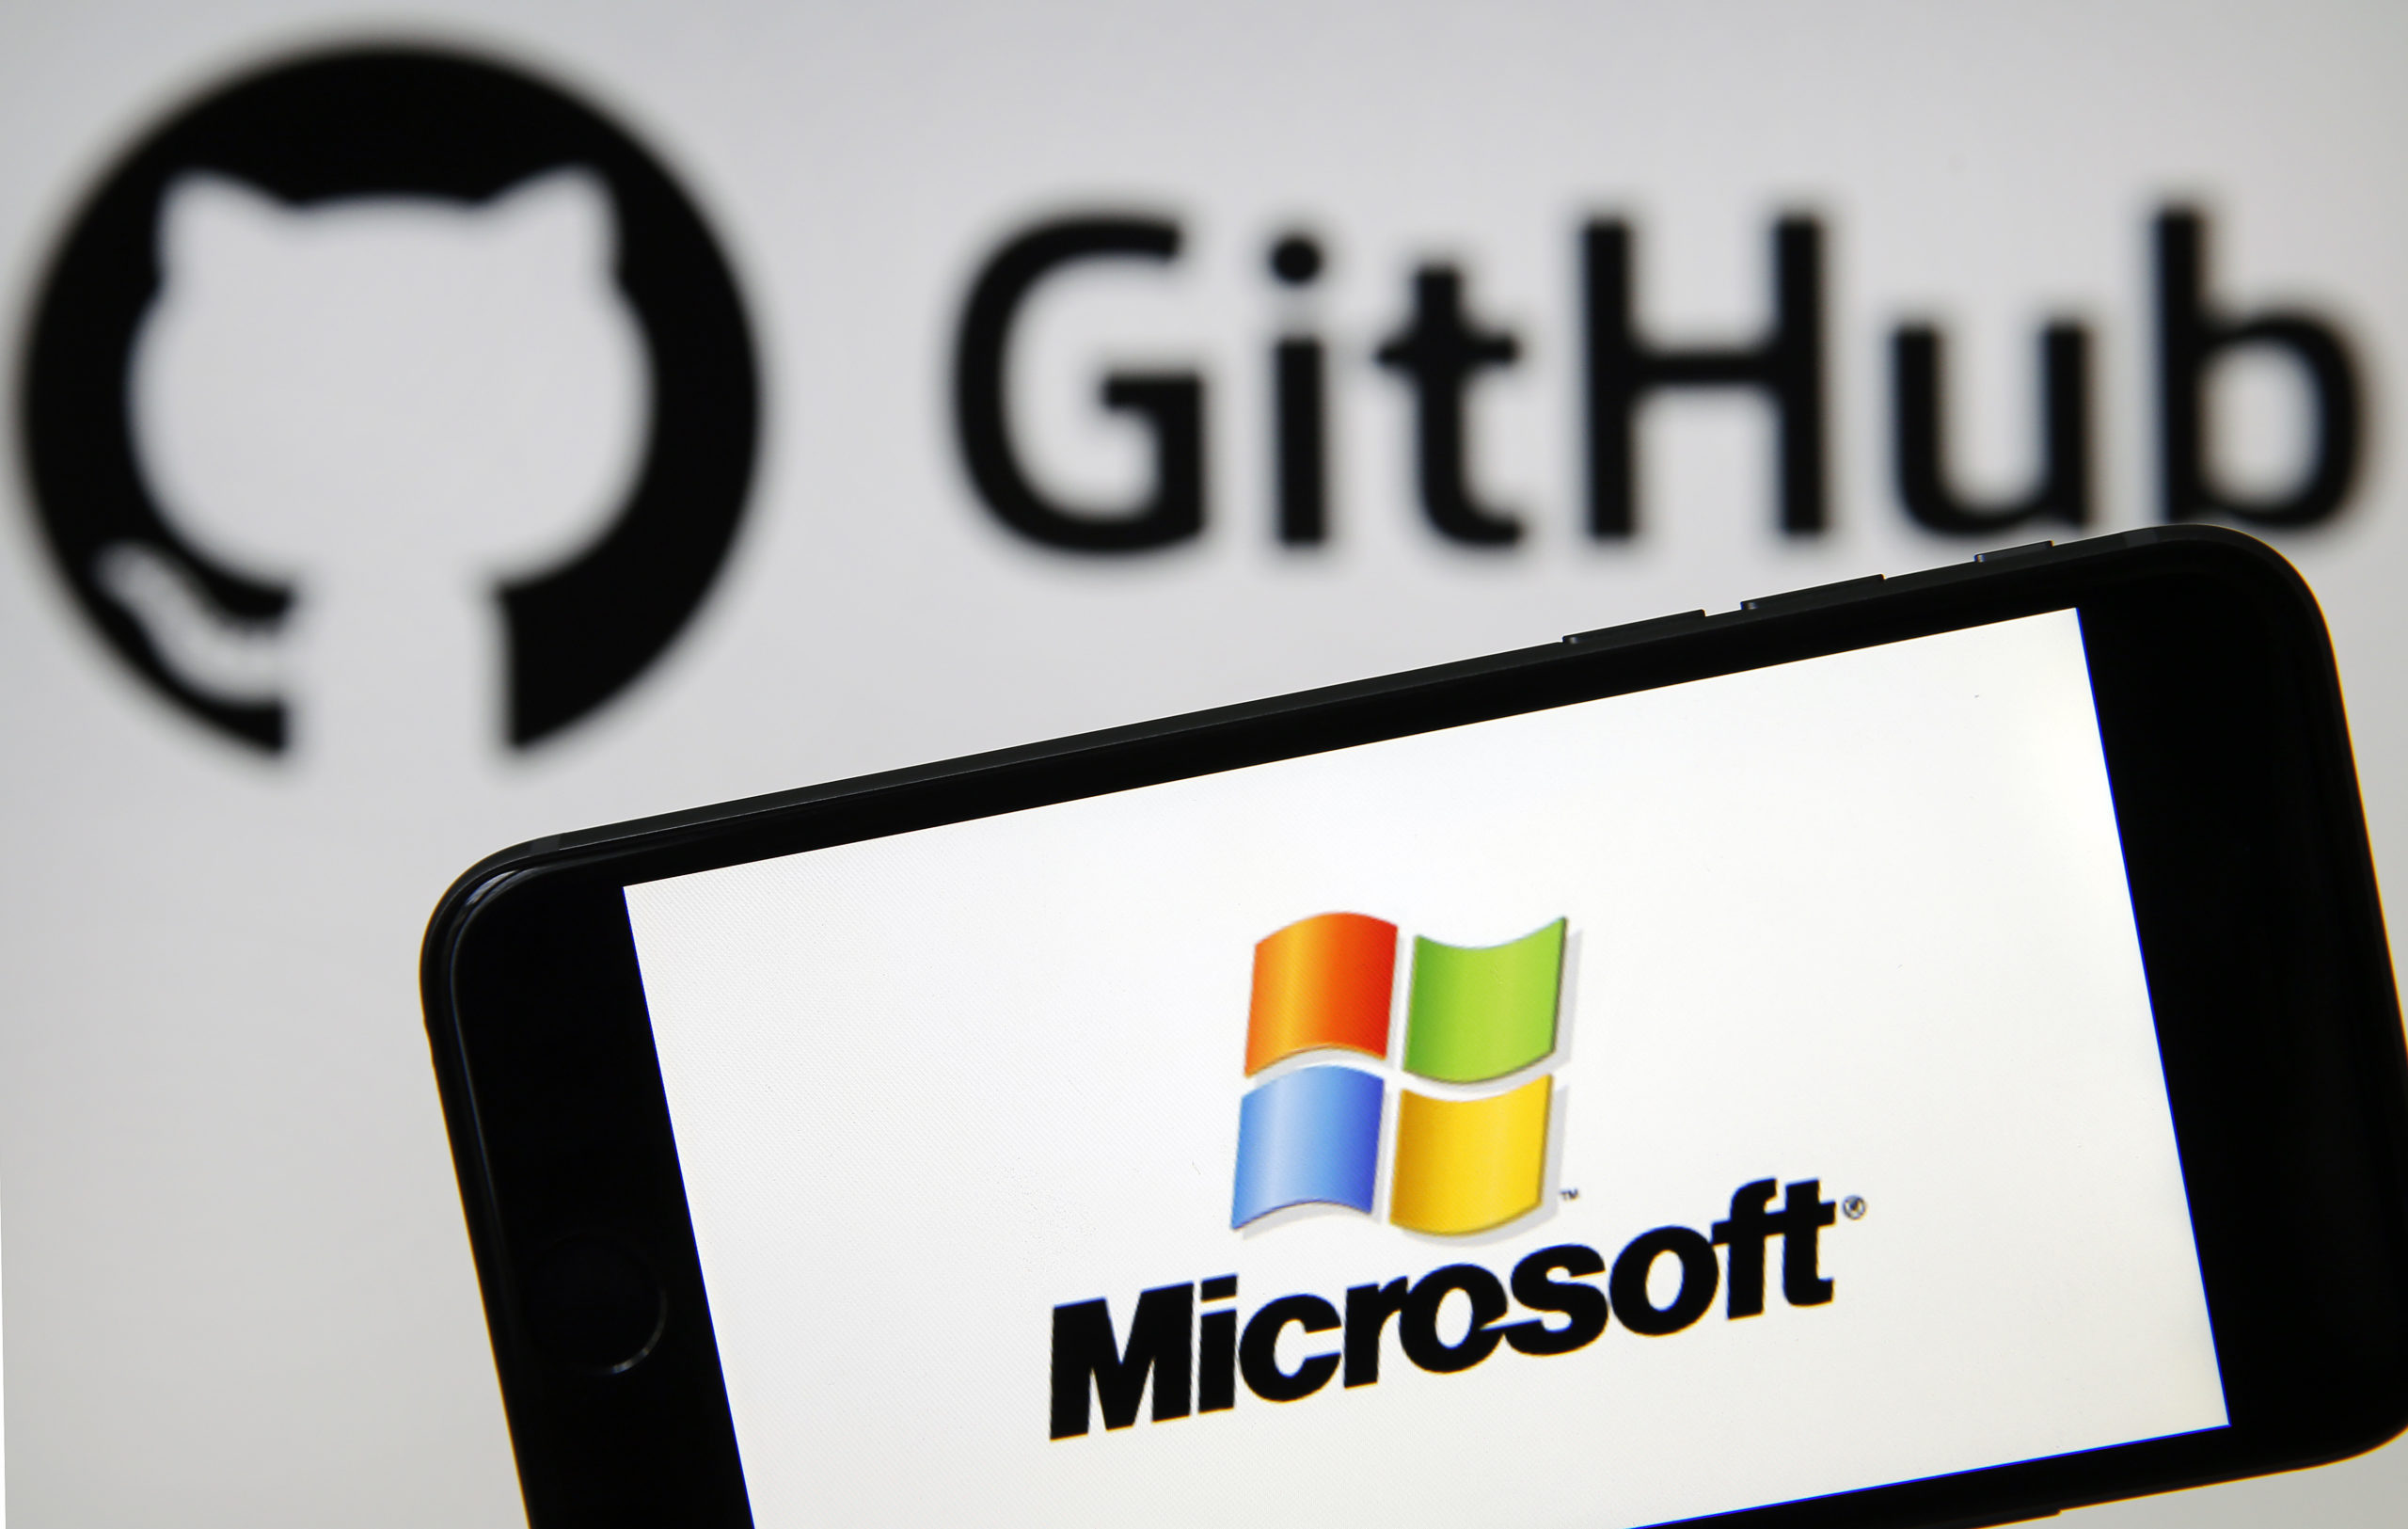 GitHub Users File A Class-Action Lawsuit Against Microsoft For Training an AI Tool With Their Code